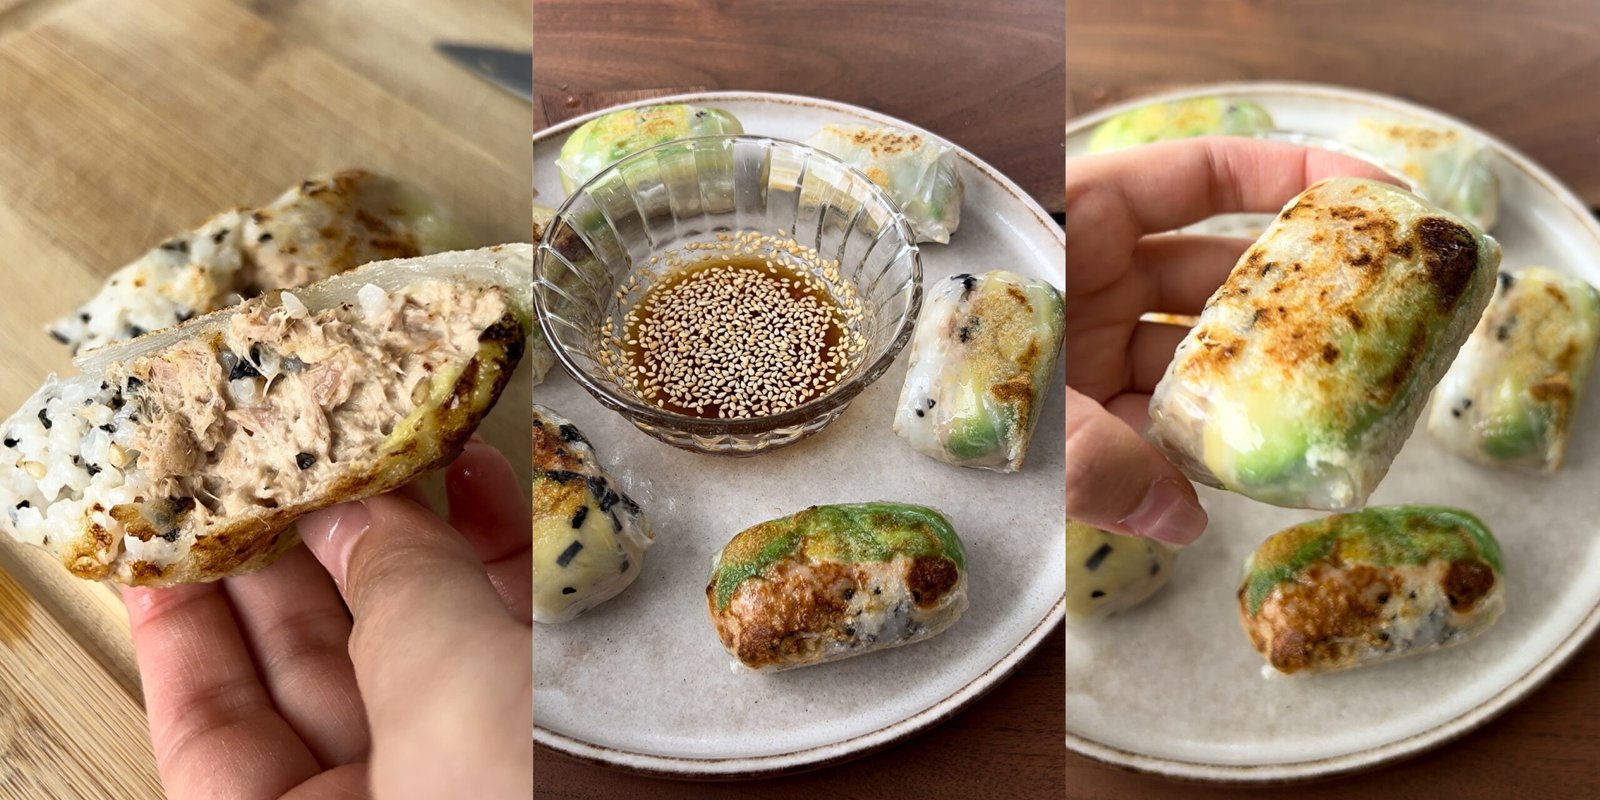 Easy Rice Paper Rolls with Leftovers! - Picklebums